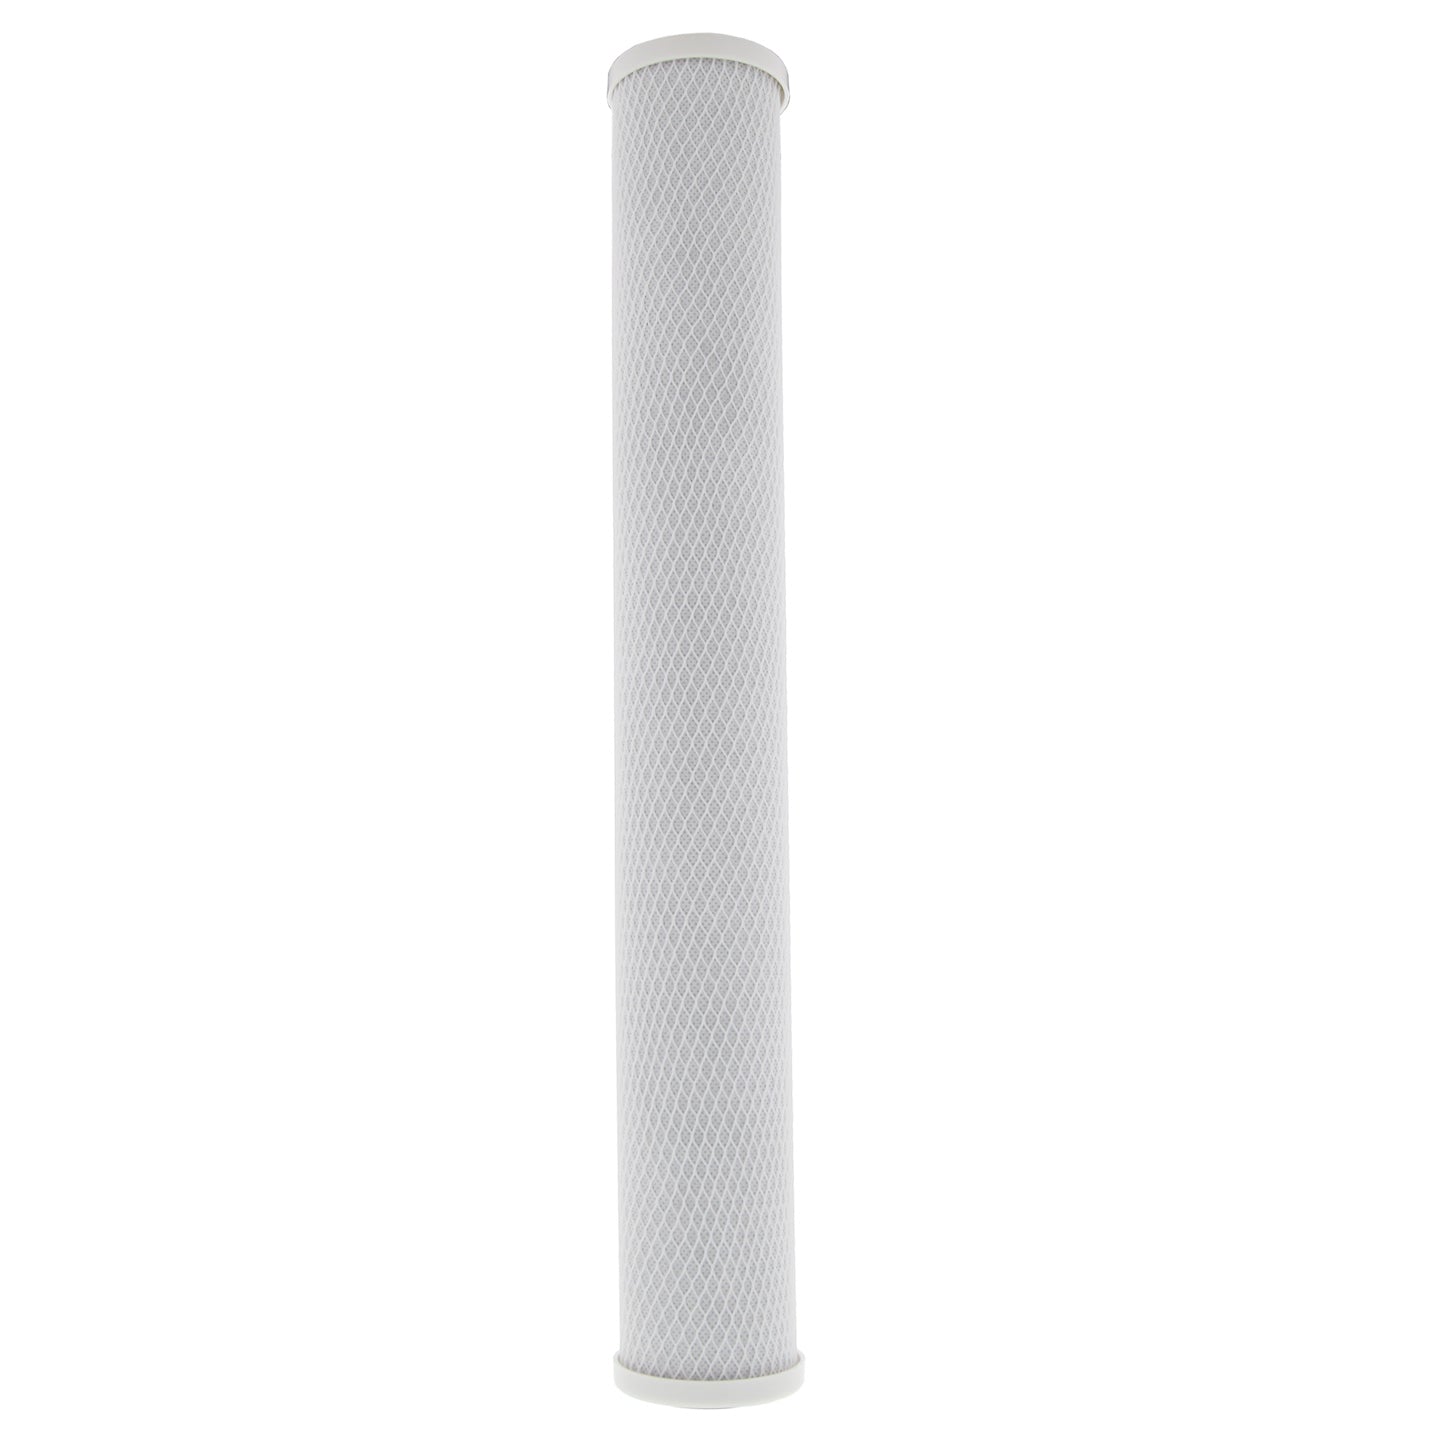 20 X 2.5 Carbon Block Replacement Filter by Tier1 (5 micron)